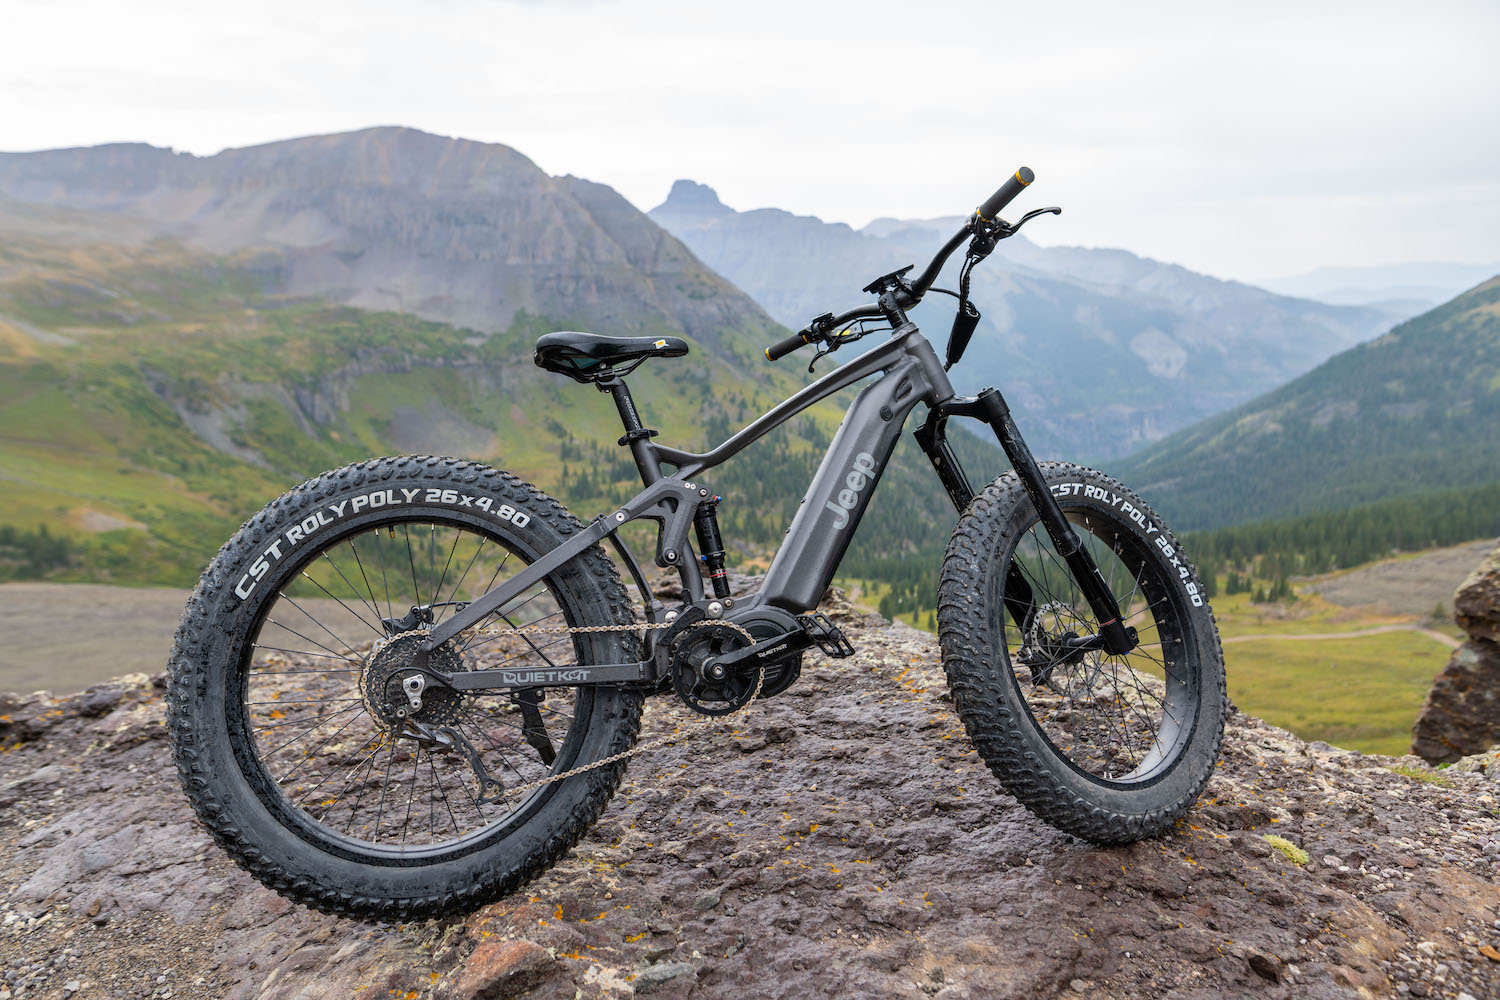 Behind the scenes look at Jeep's new high power full suspension e-bikes